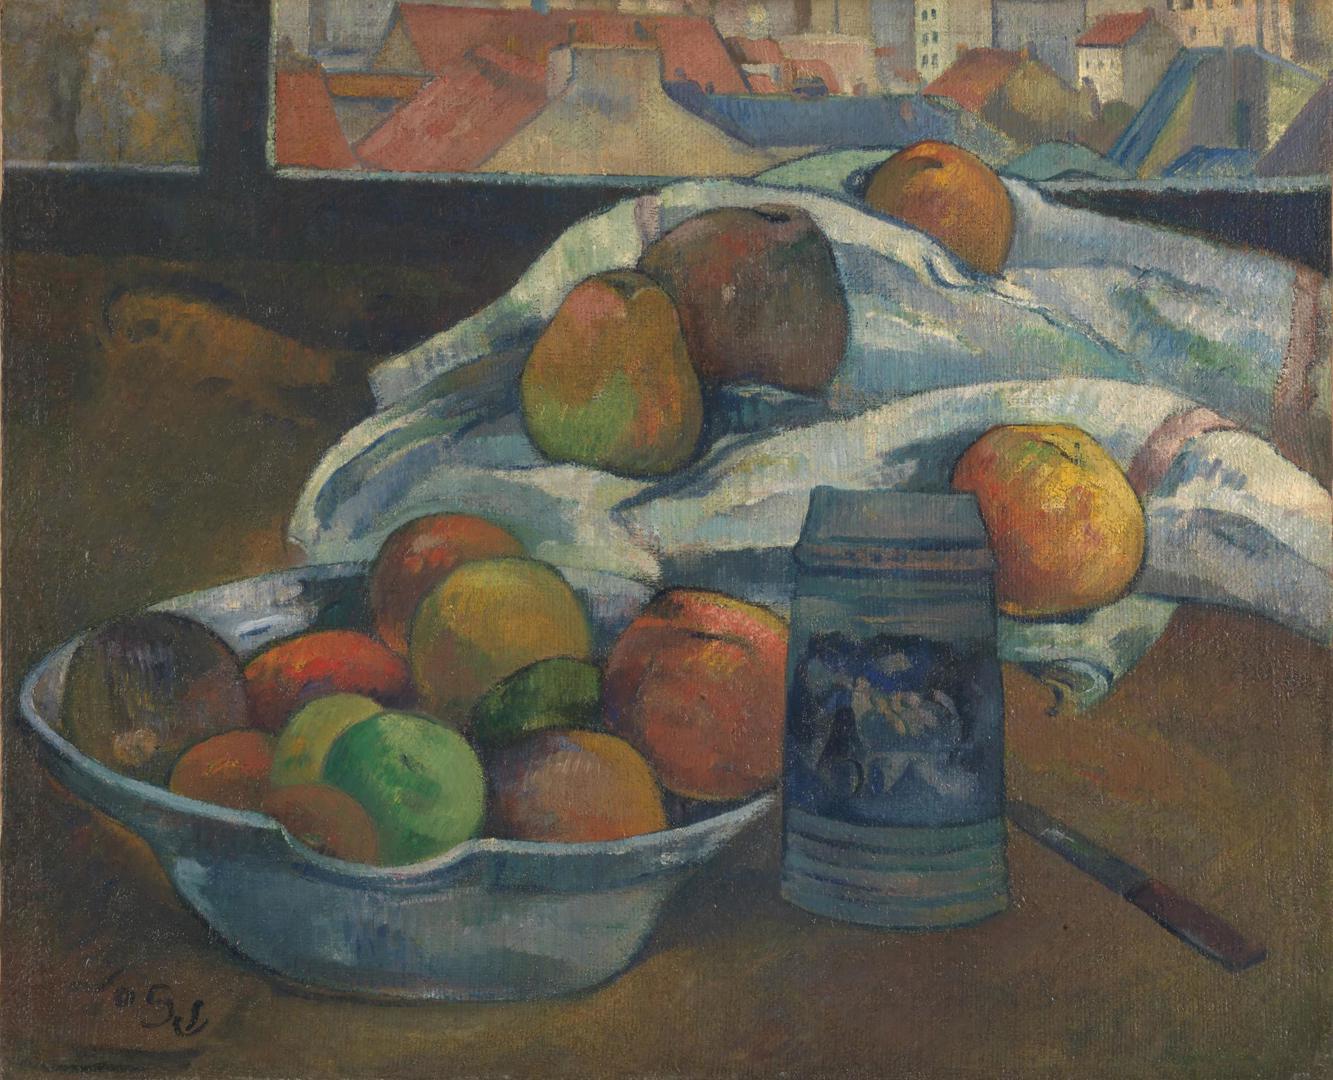 Bowl of Fruit and Tankard before a Window by Paul Gauguin